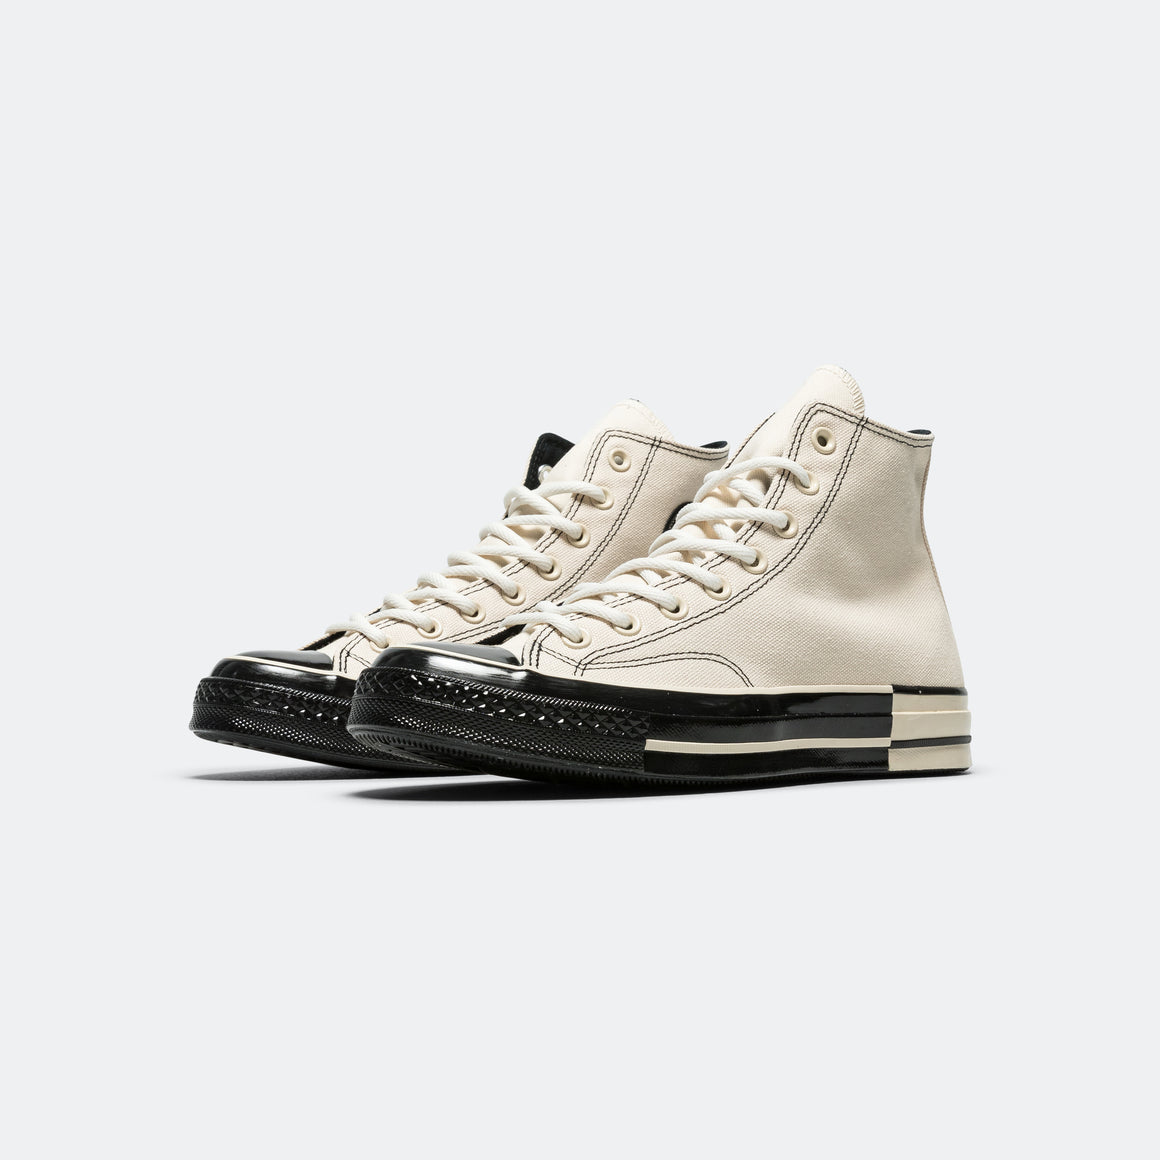 Converse - CT 70 Hi - Ivory/Black - UP THERE